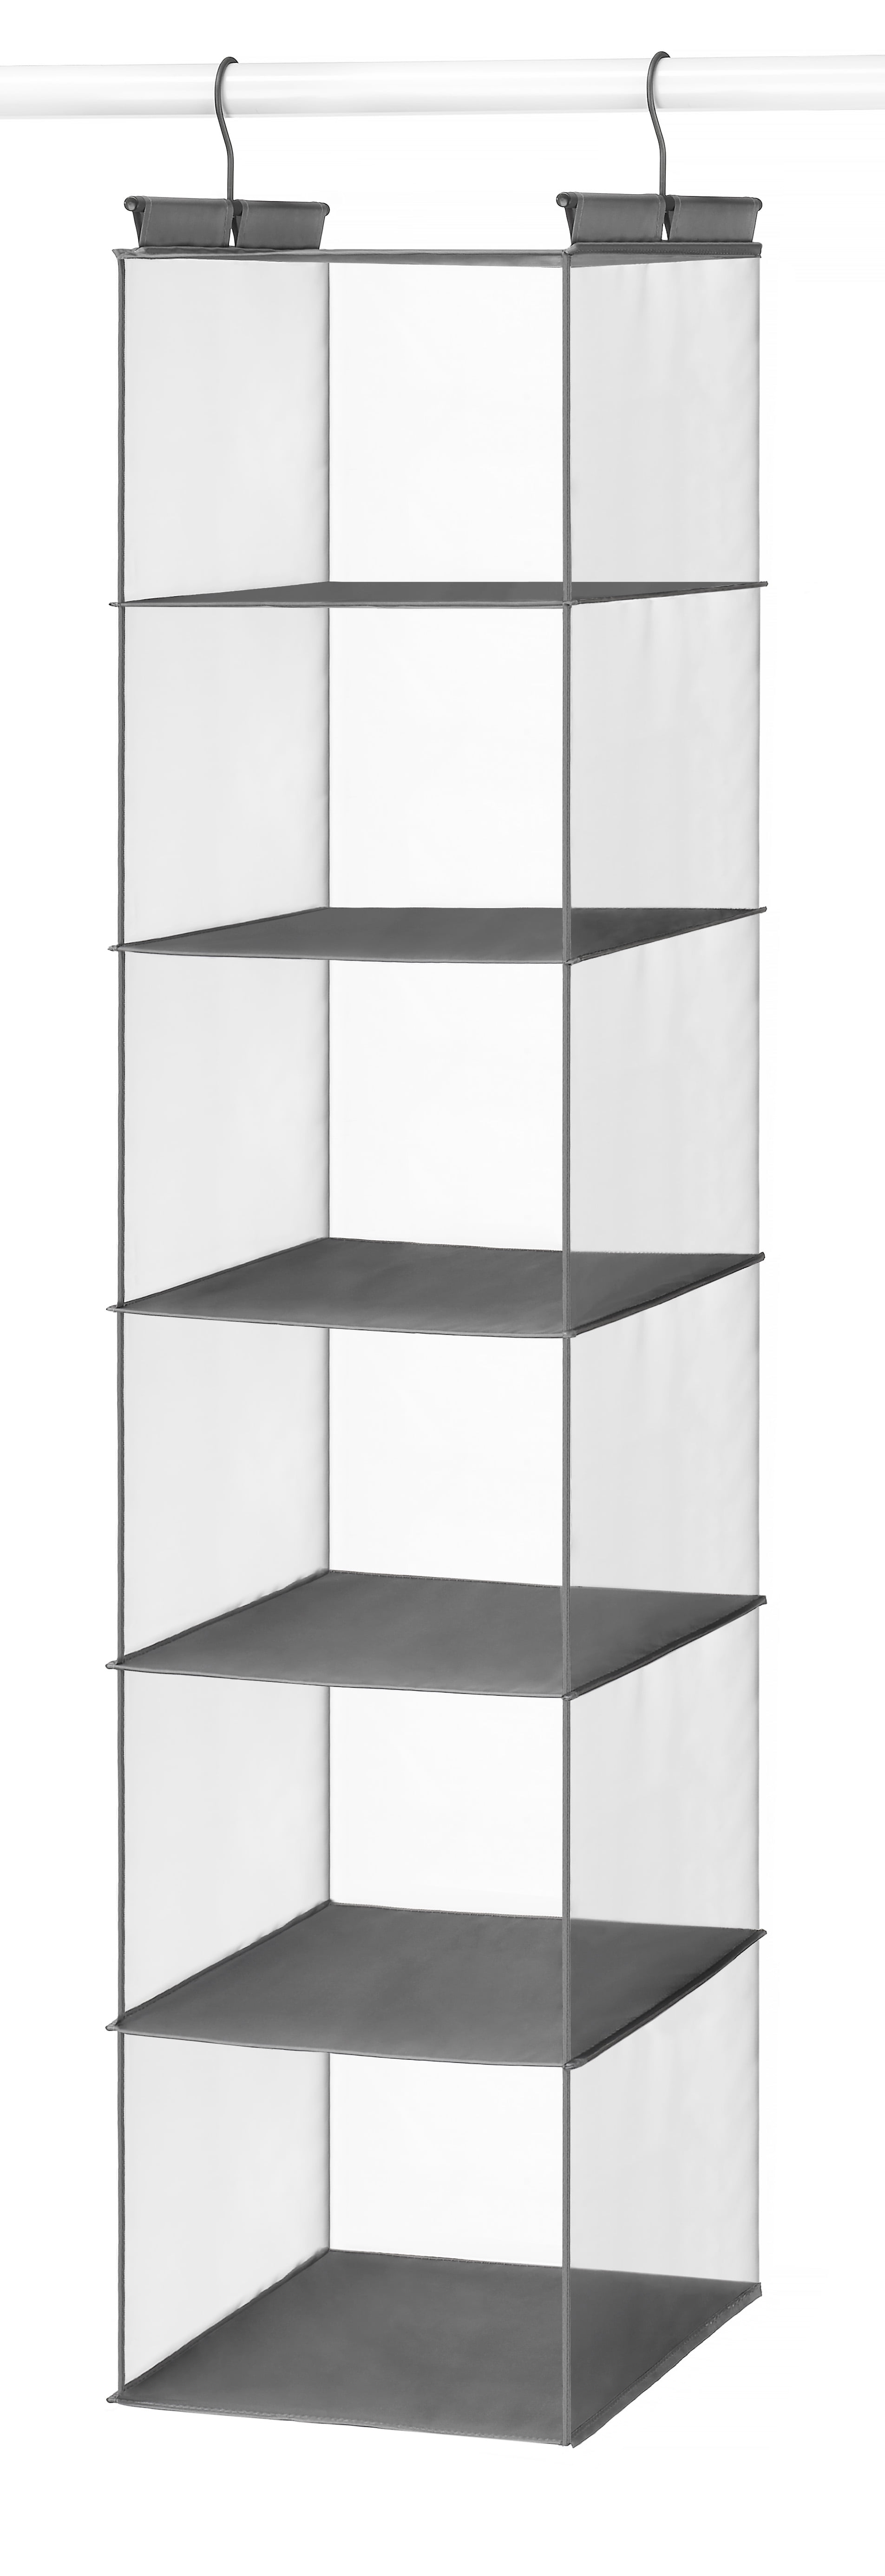 Whitmor 5 Section Closet Organizer Hanging Shelves With Sturdy Metal Frame for sale online